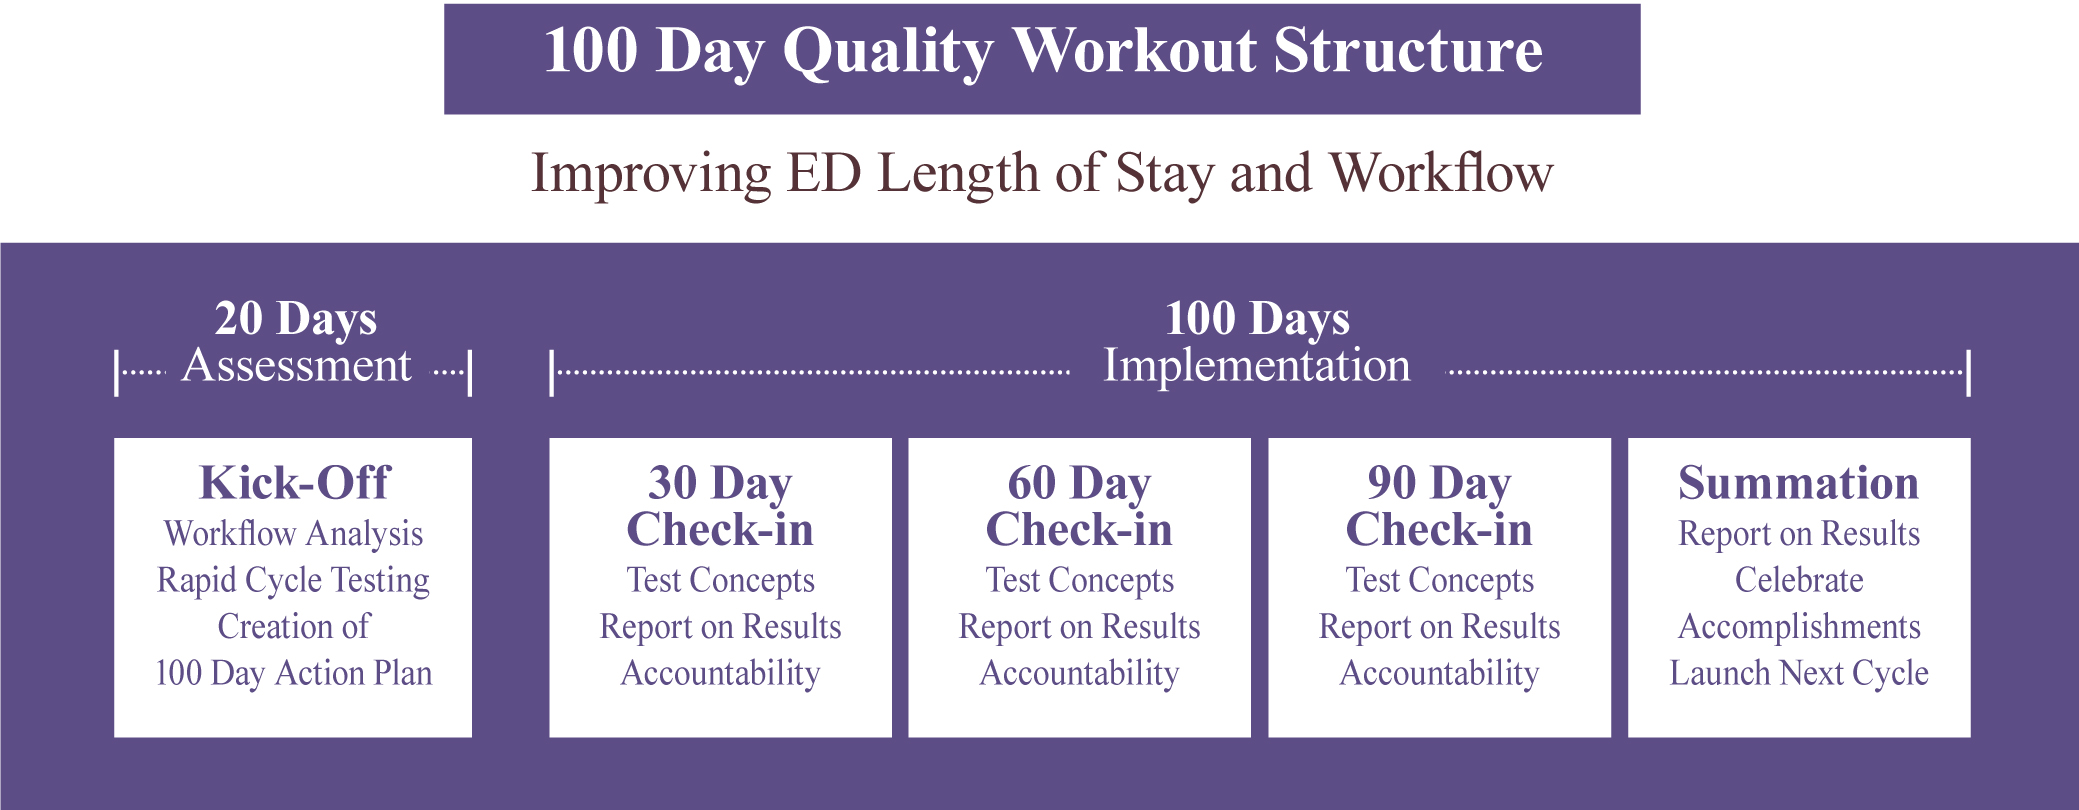 100 Day Quality Workout Structure